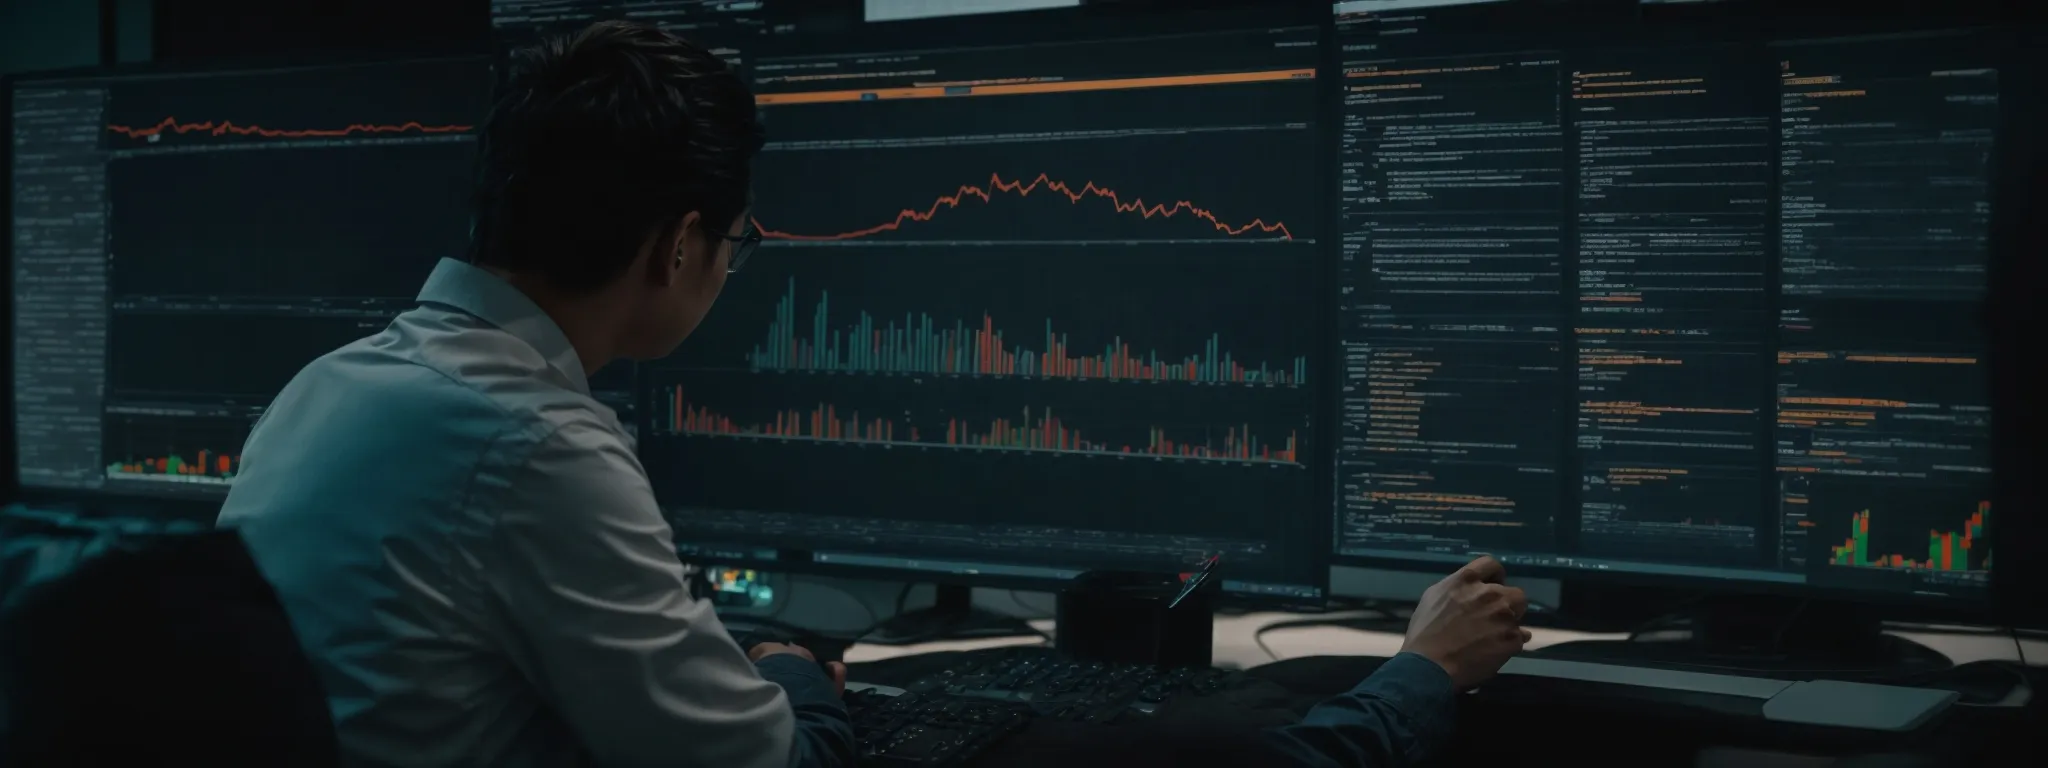 a person analyzing a complex data dashboard on a computer screen, reflecting a deep dive into seo strategies.